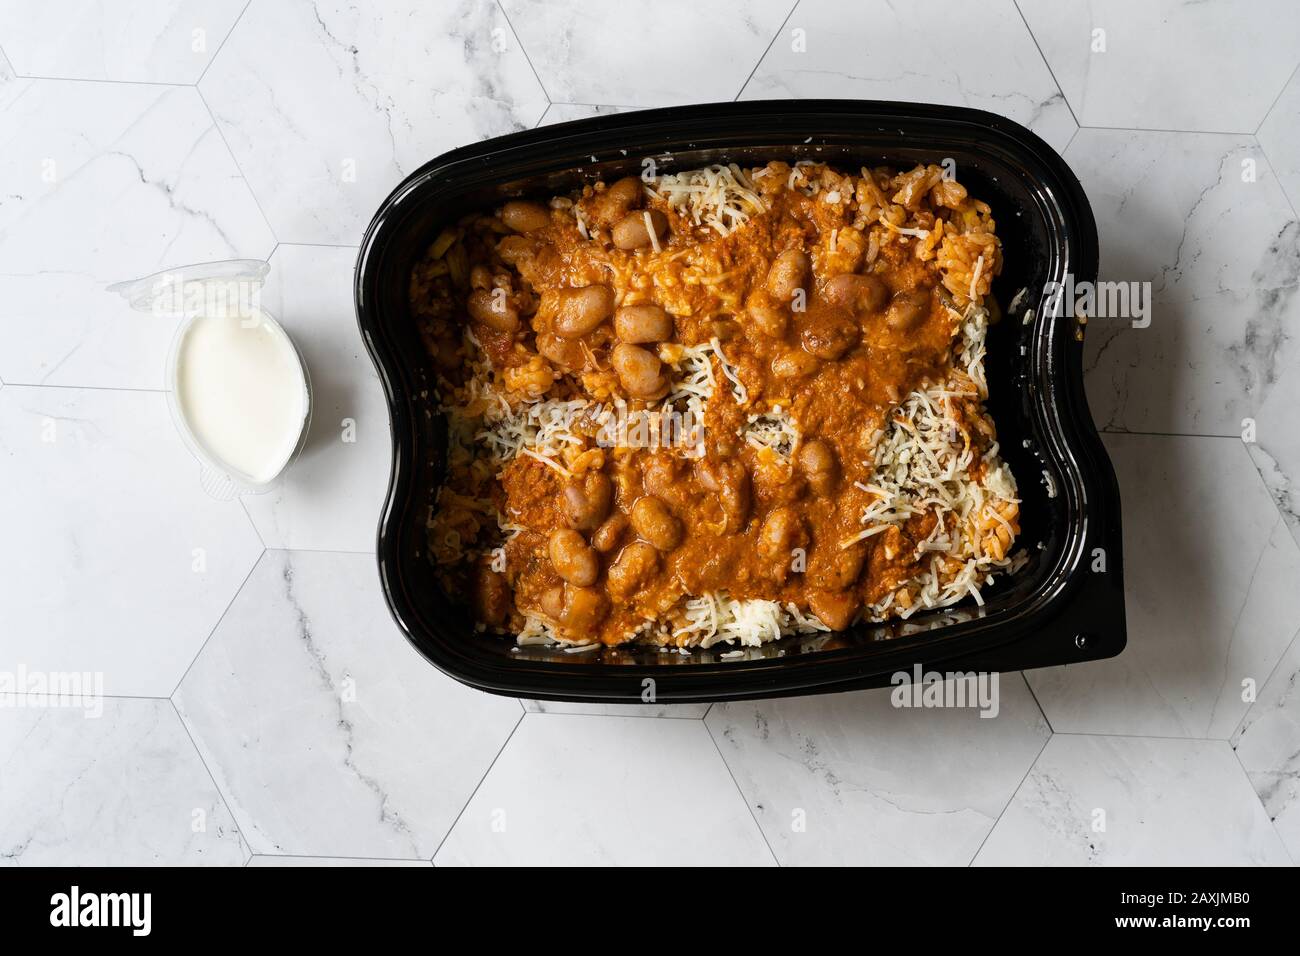 https://c8.alamy.com/comp/2AXJMB0/take-away-mexican-food-rice-with-kidney-bean-sour-cream-grated-mozzarella-cheese-and-salsa-sauce-pilaf-in-plastic-container-box-package-ready-2AXJMB0.jpg